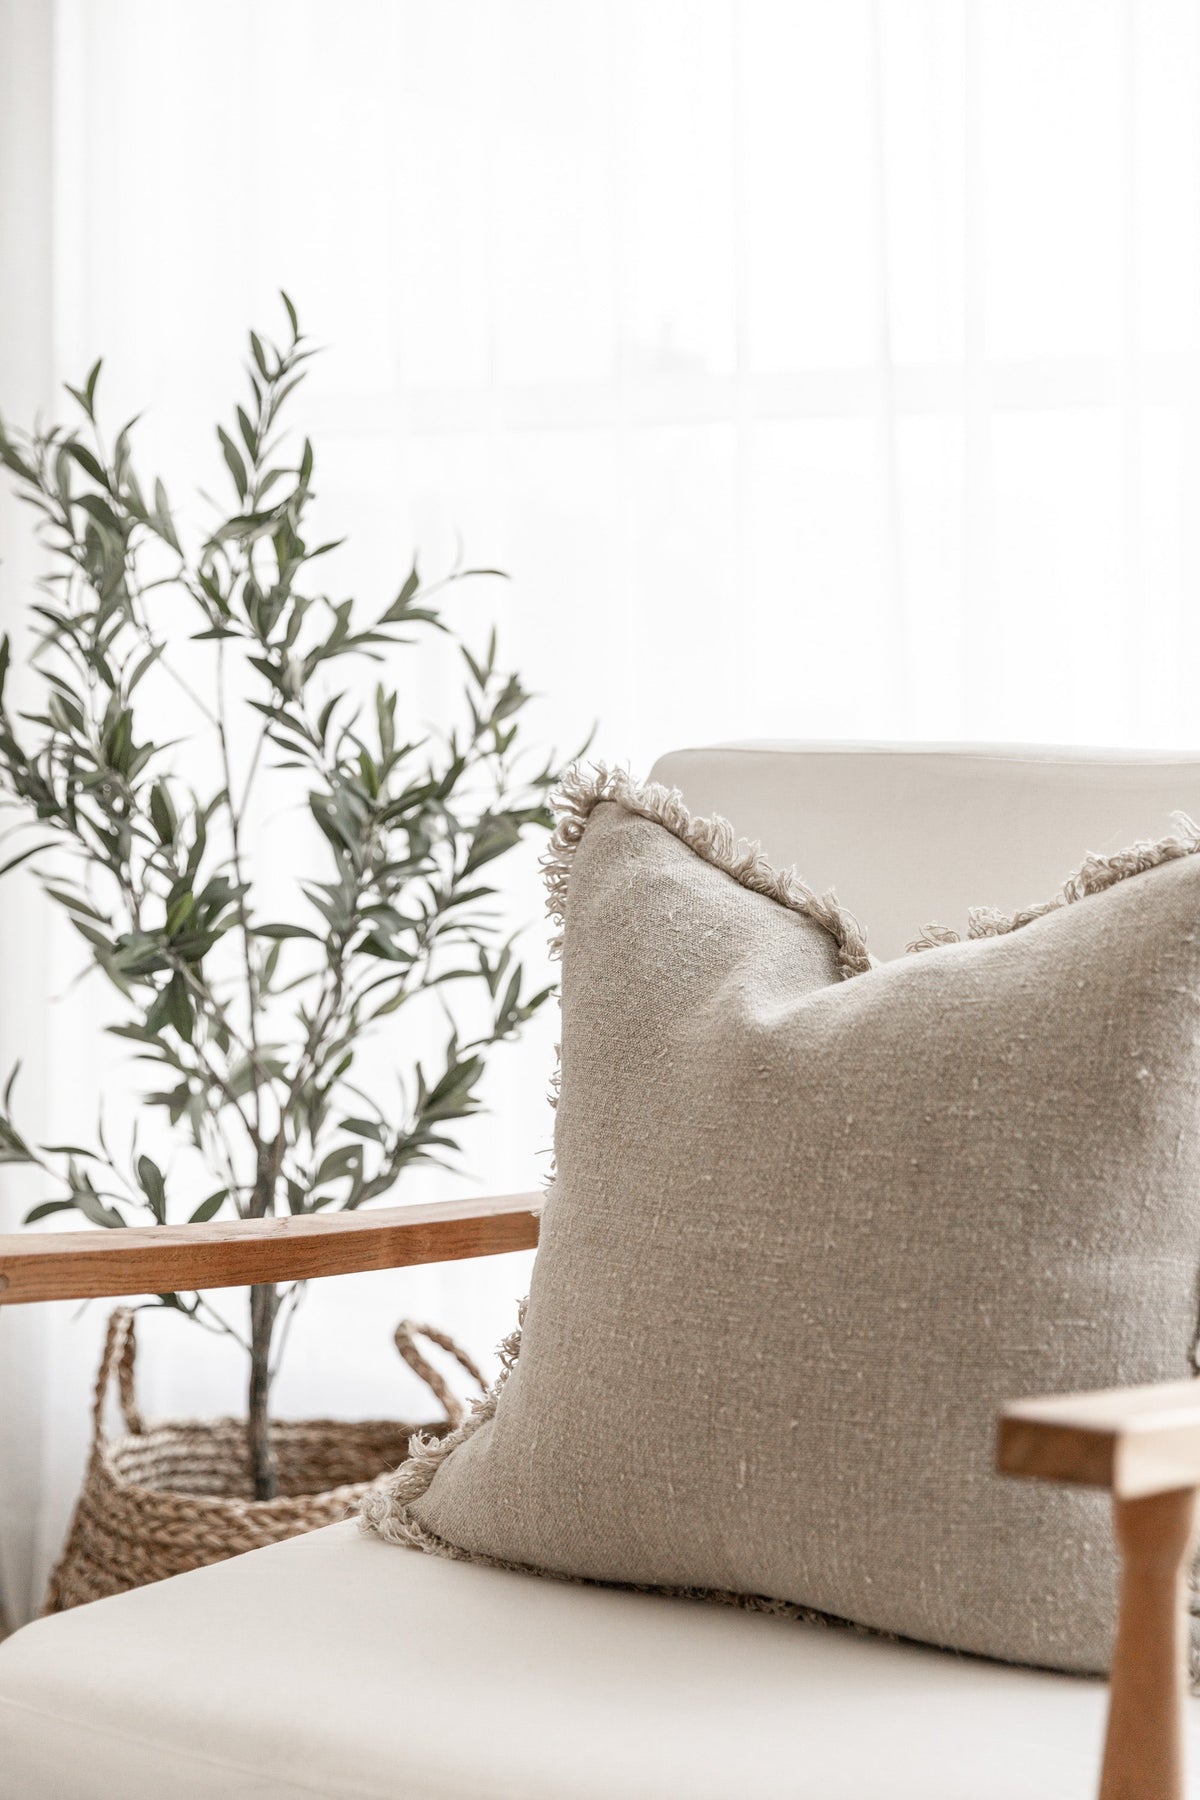 Luxurious, handloomed & versatile the Briar cushions are a must have staple for any interior. The reversible design is form meets function at its finest.  Made from 100% pure linen with raw, textured & rustic appeal, each cushion with the option for use as a natural or white cushion. 